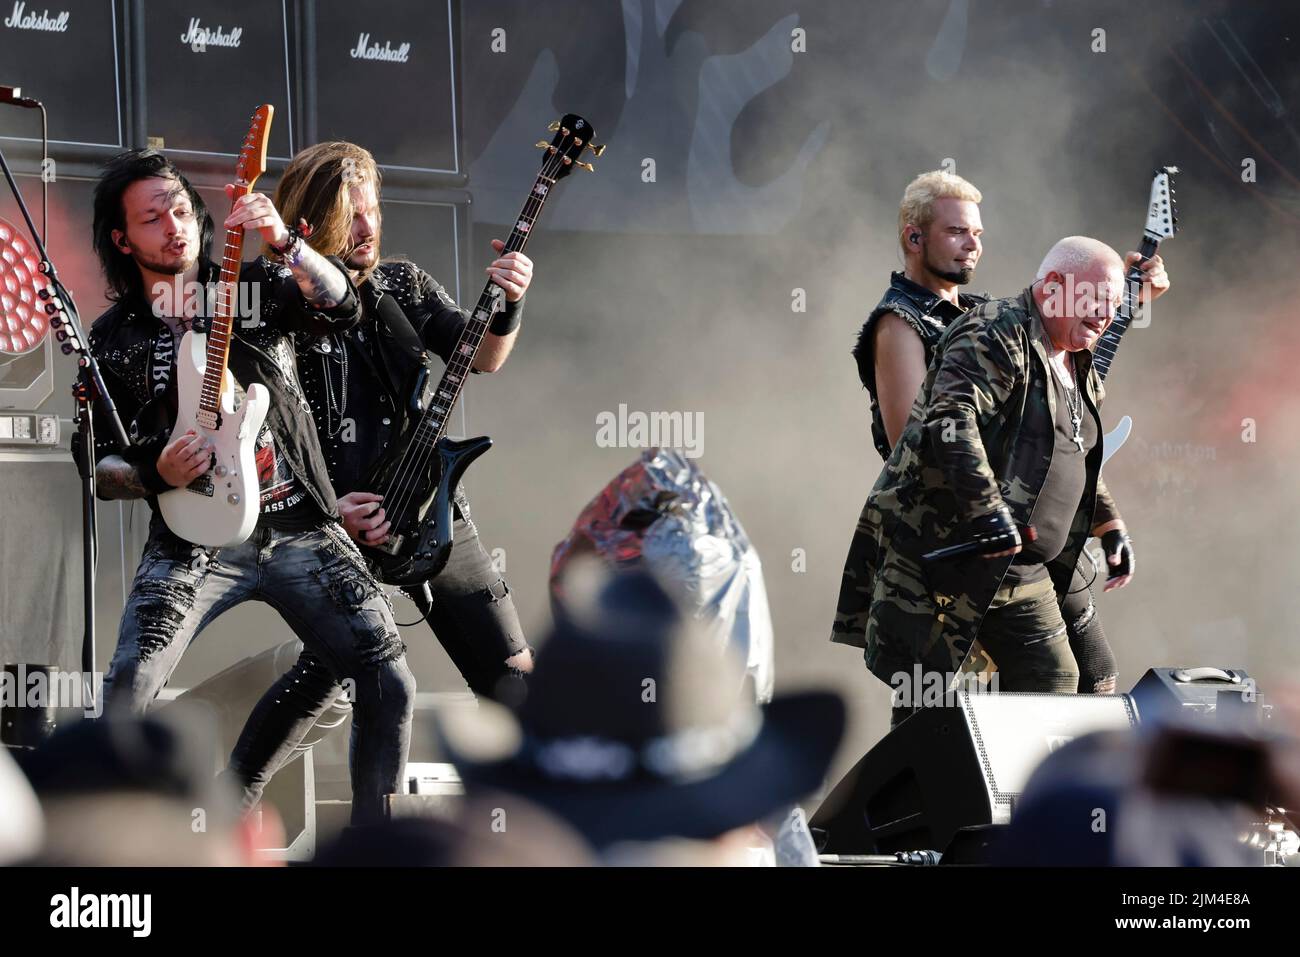 Wacken, Germany. 04th Aug, 2022. Guitarist Richie Faulkner (l) and singer  Robert Halford stand together during a performance of the British band  "Judas Priest" at WOA - Wacken Open Air. The WOA